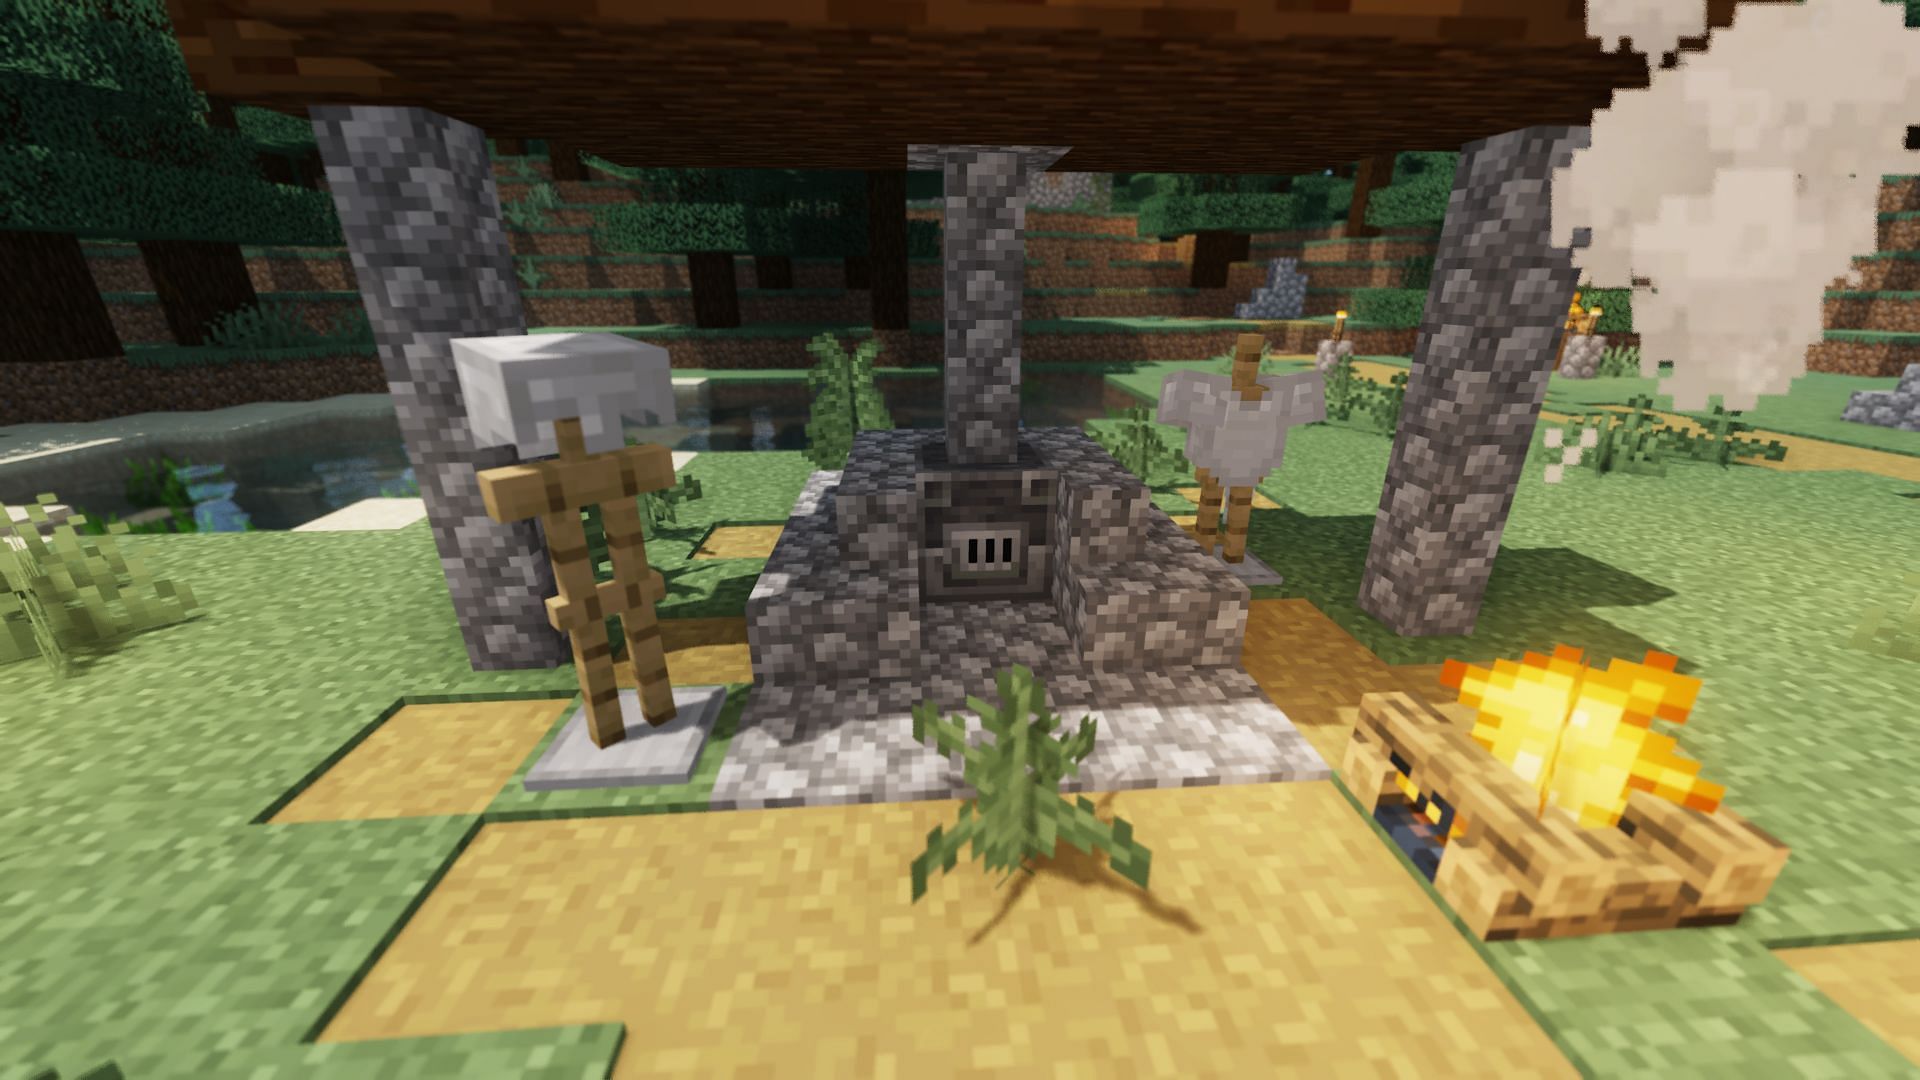 The naturally generated armor stands found in taiga villages (Image via Minecraft)